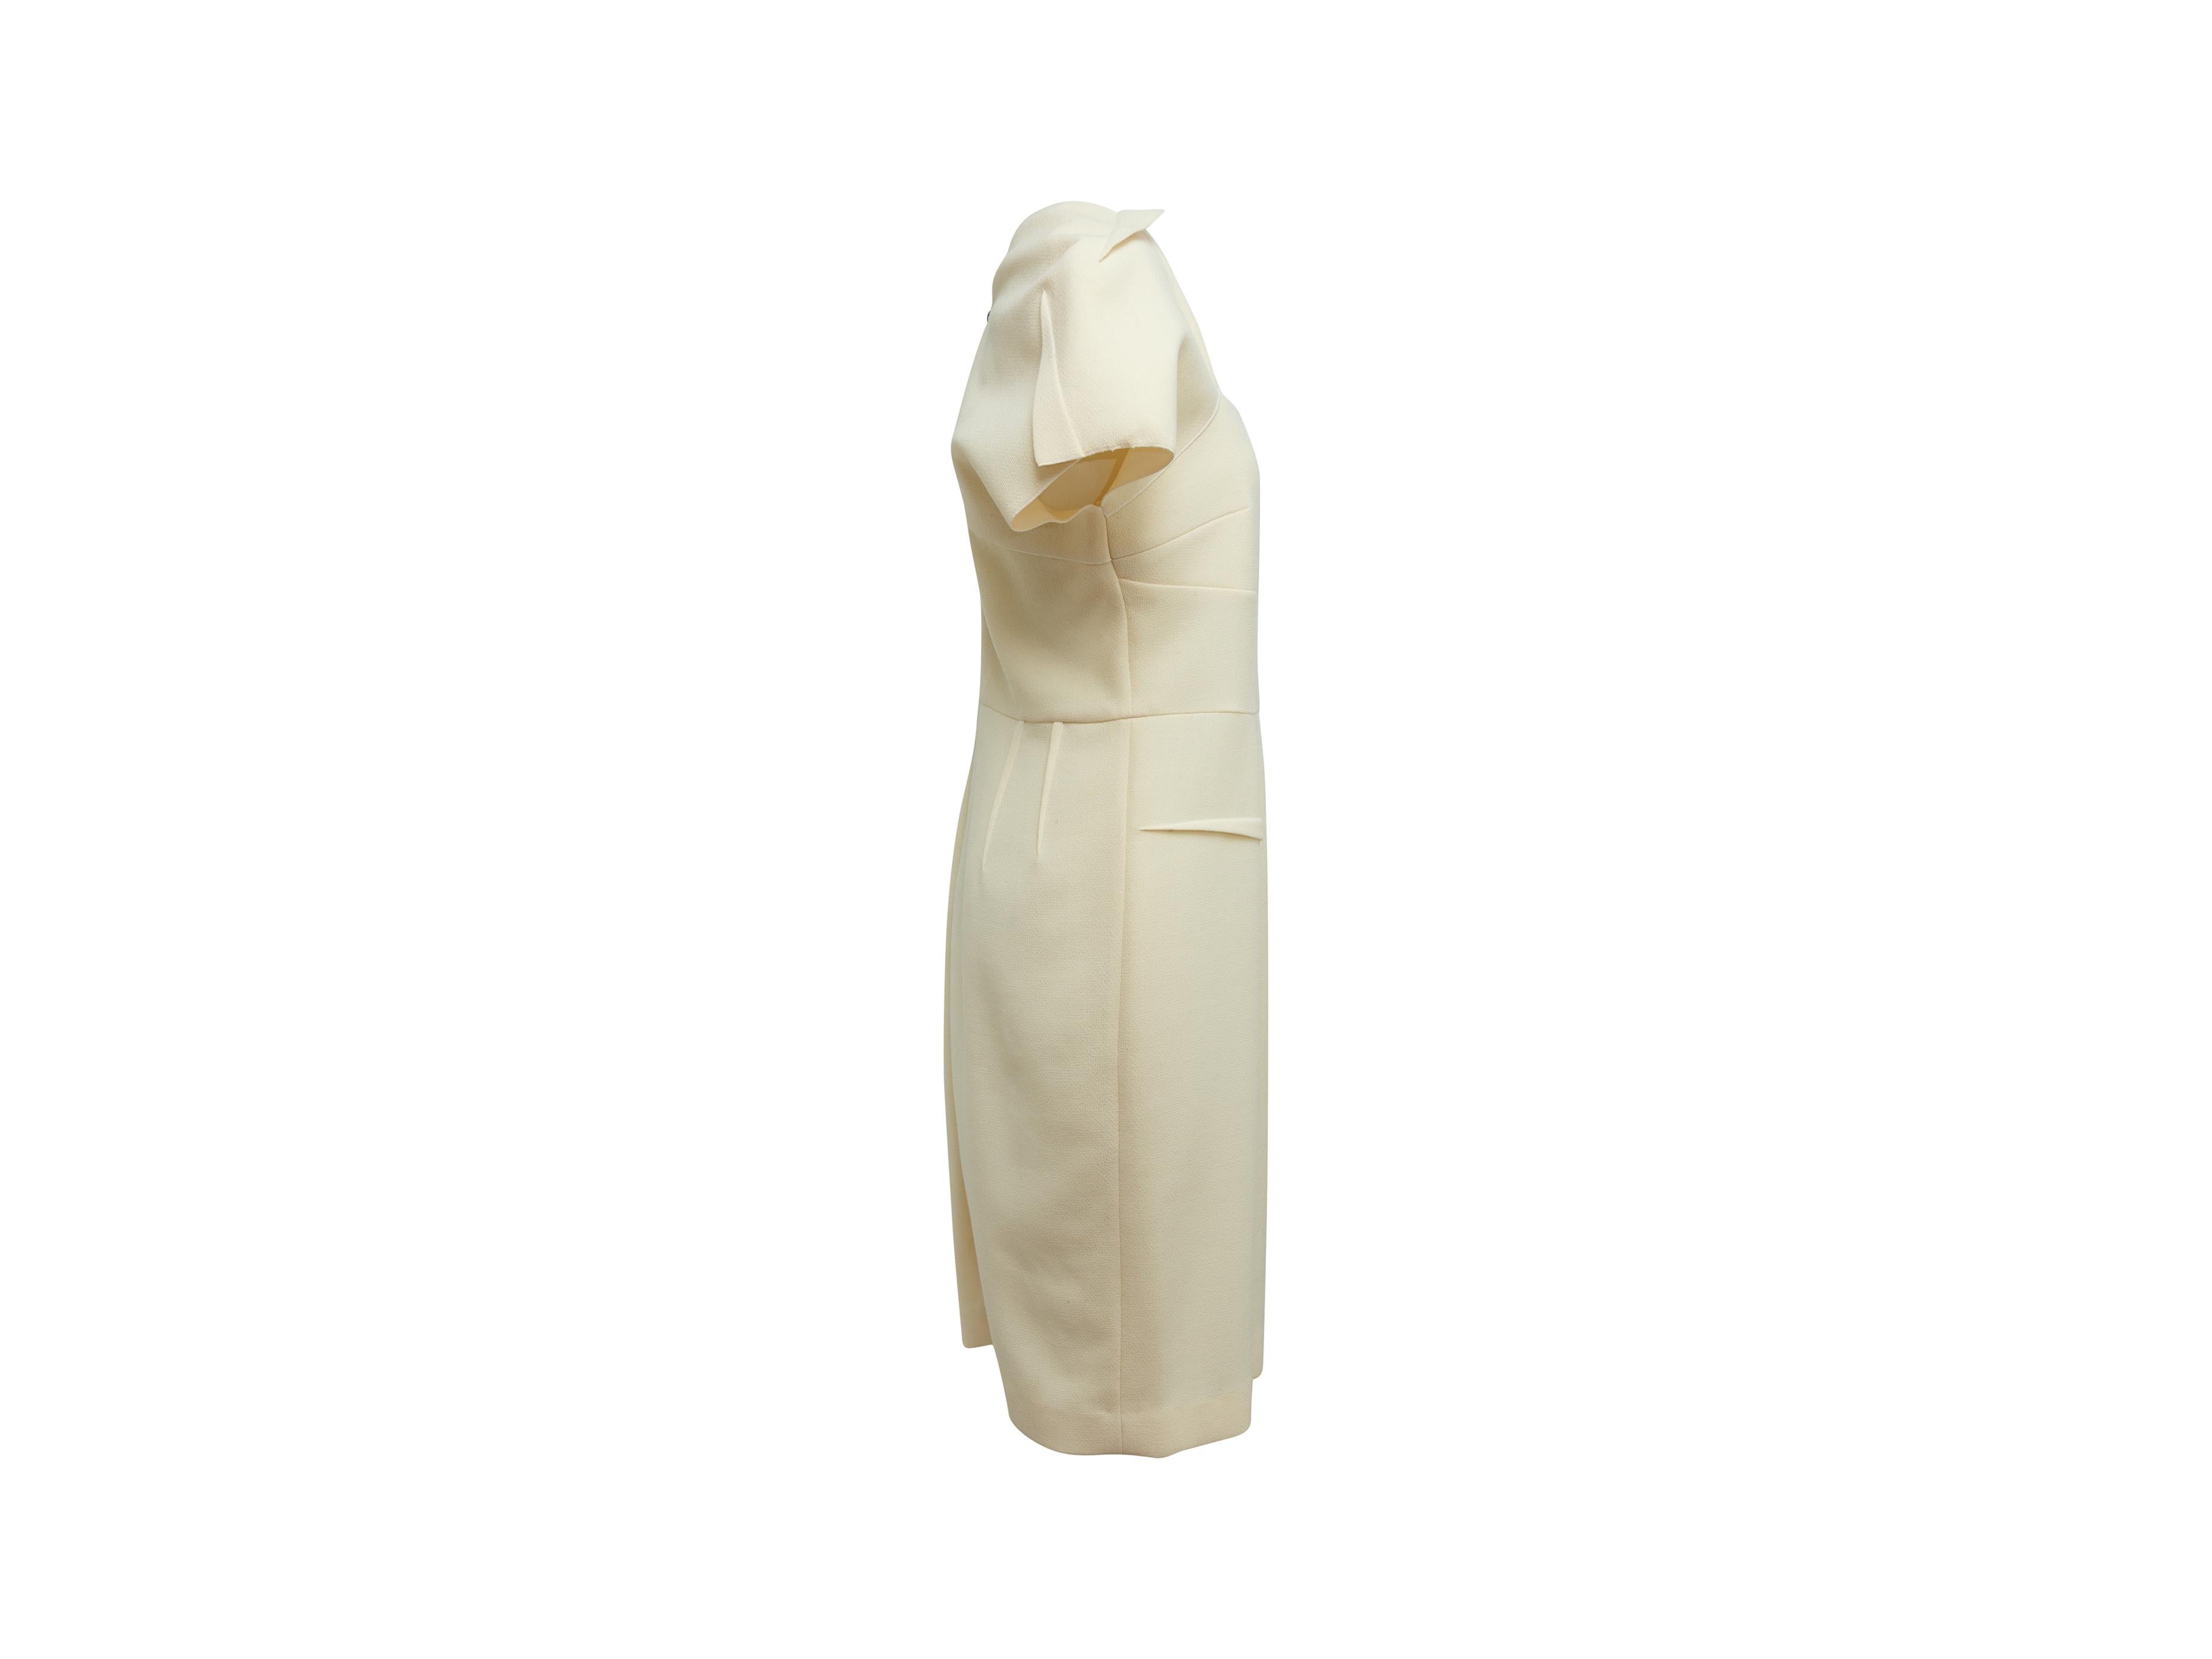 Product details: Cream wool midi dress by Roland Mouret. Short sleeves. Tonal stitching throughout. Exposed zip closure at back. 37